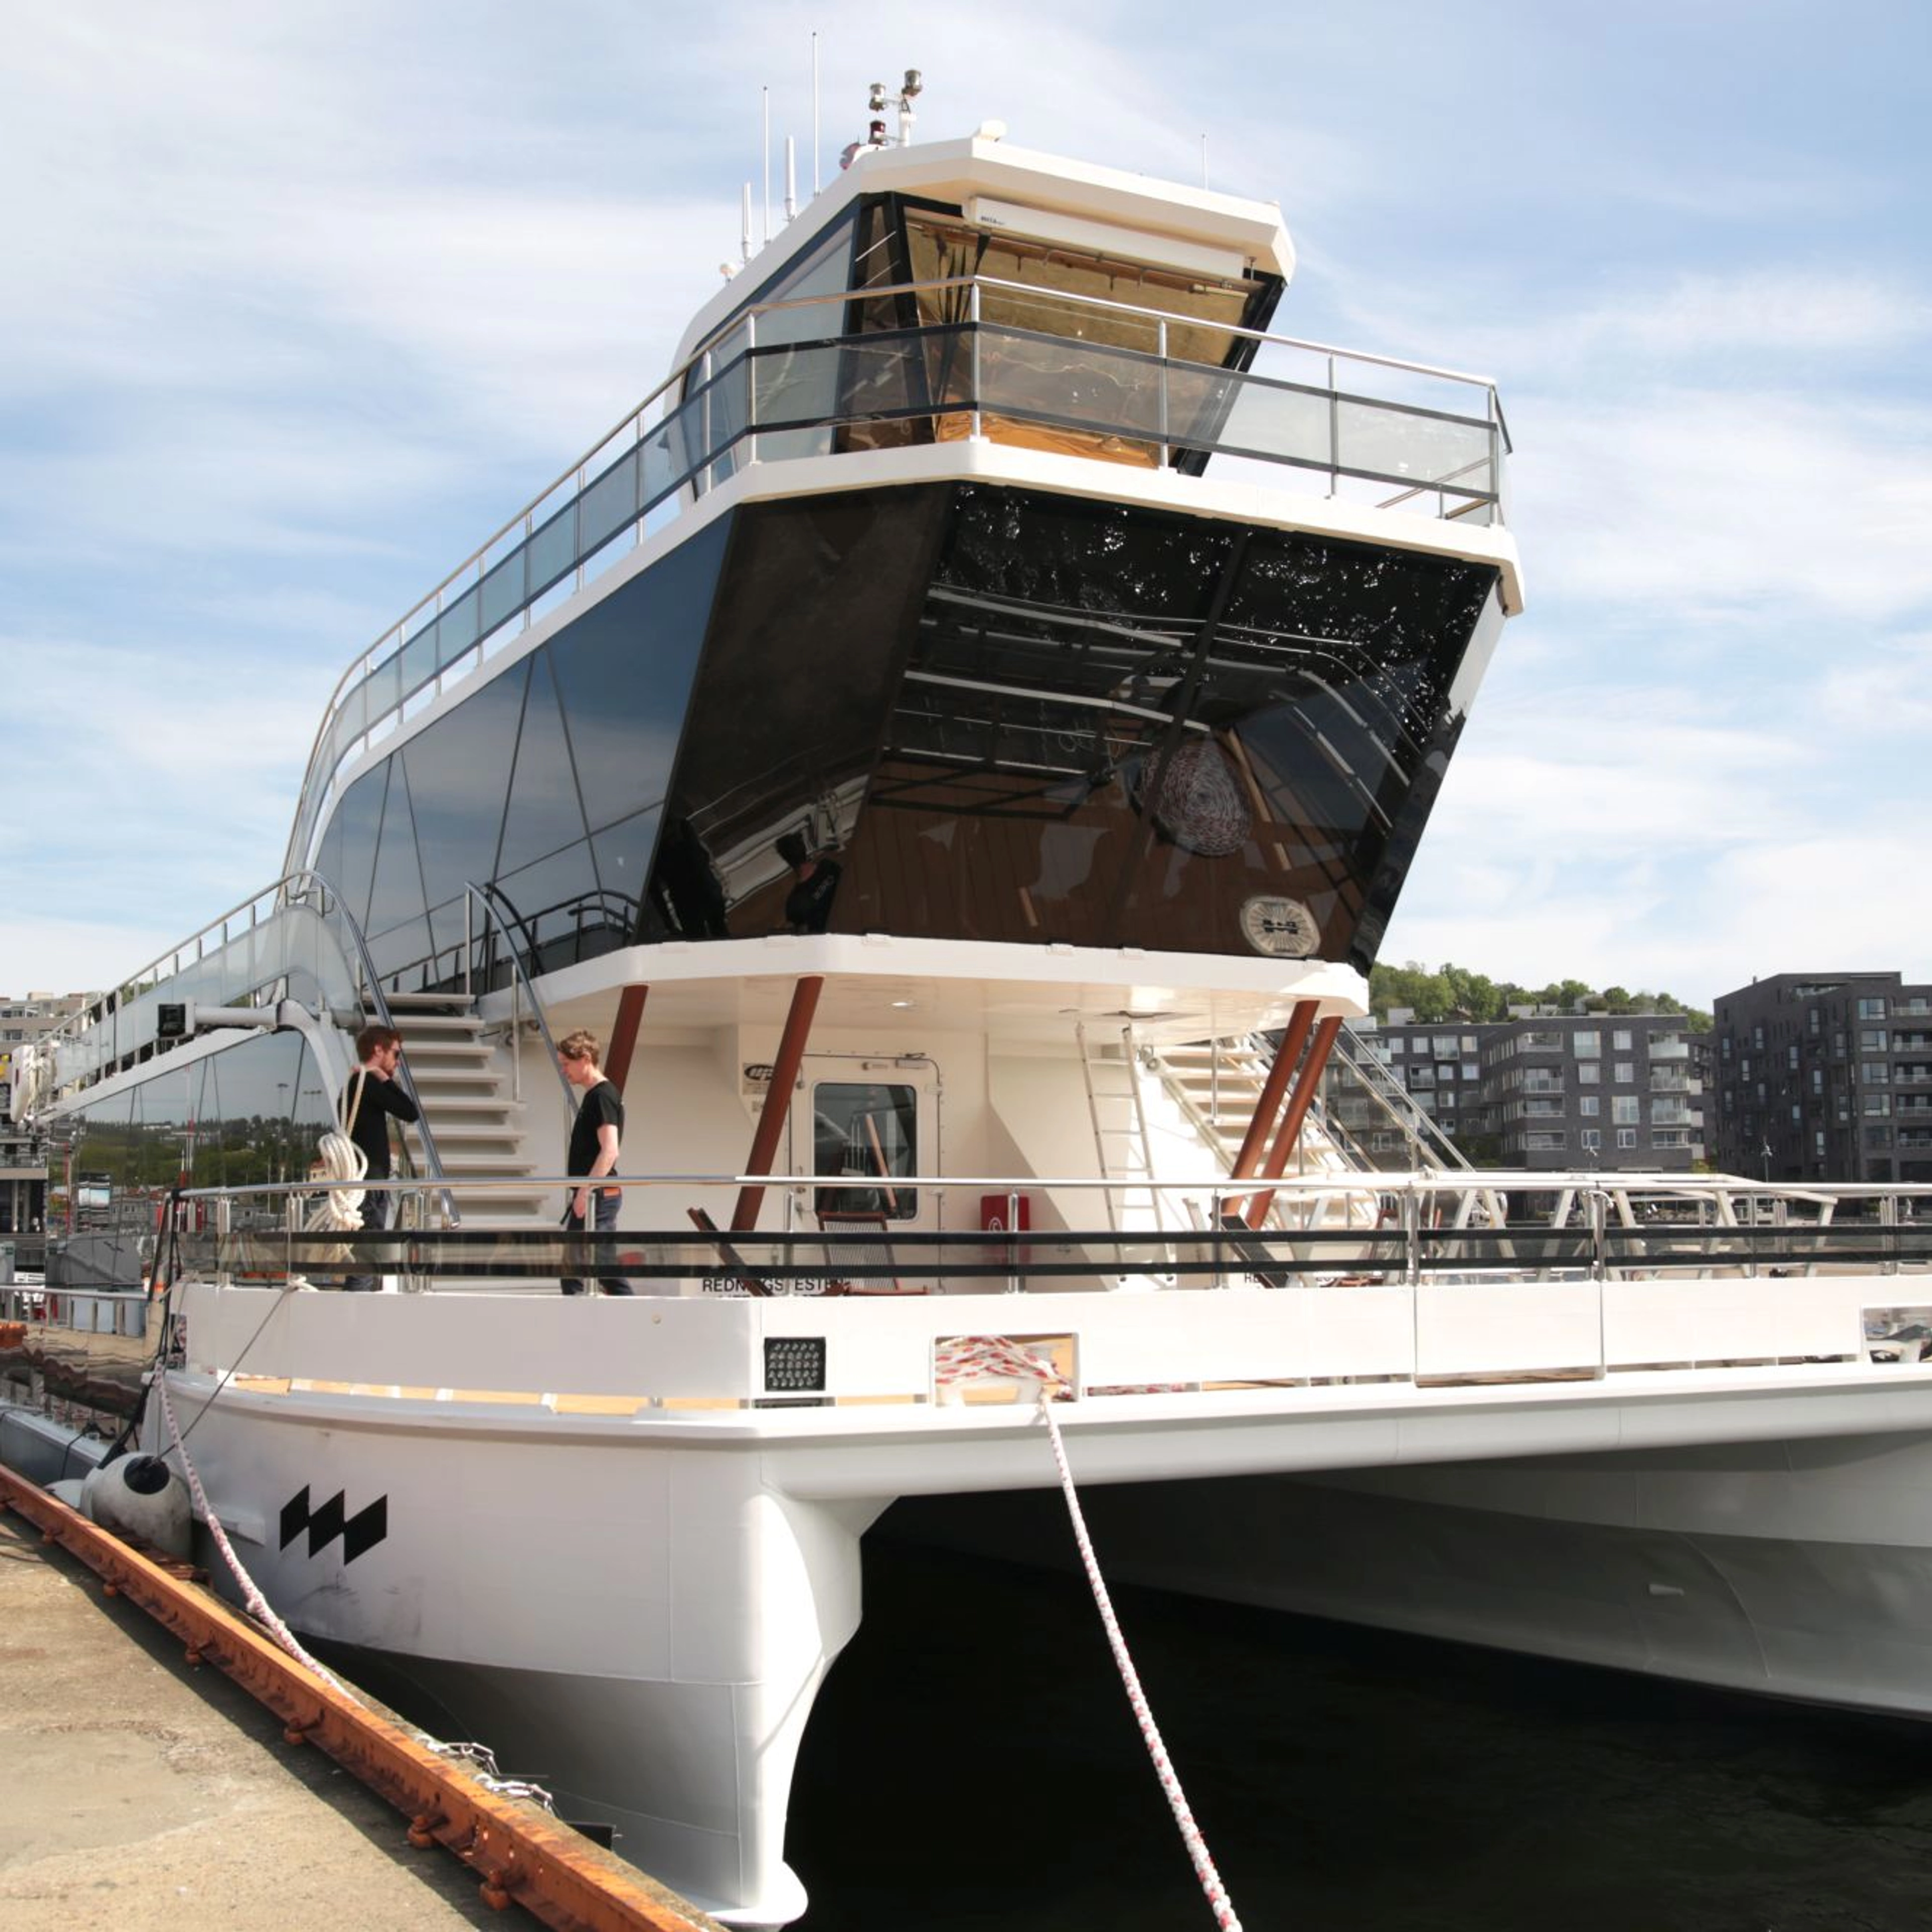 Dinner cruise on the Oslo Fjord with a silent hybrid boat - dock in Oslo, Norway